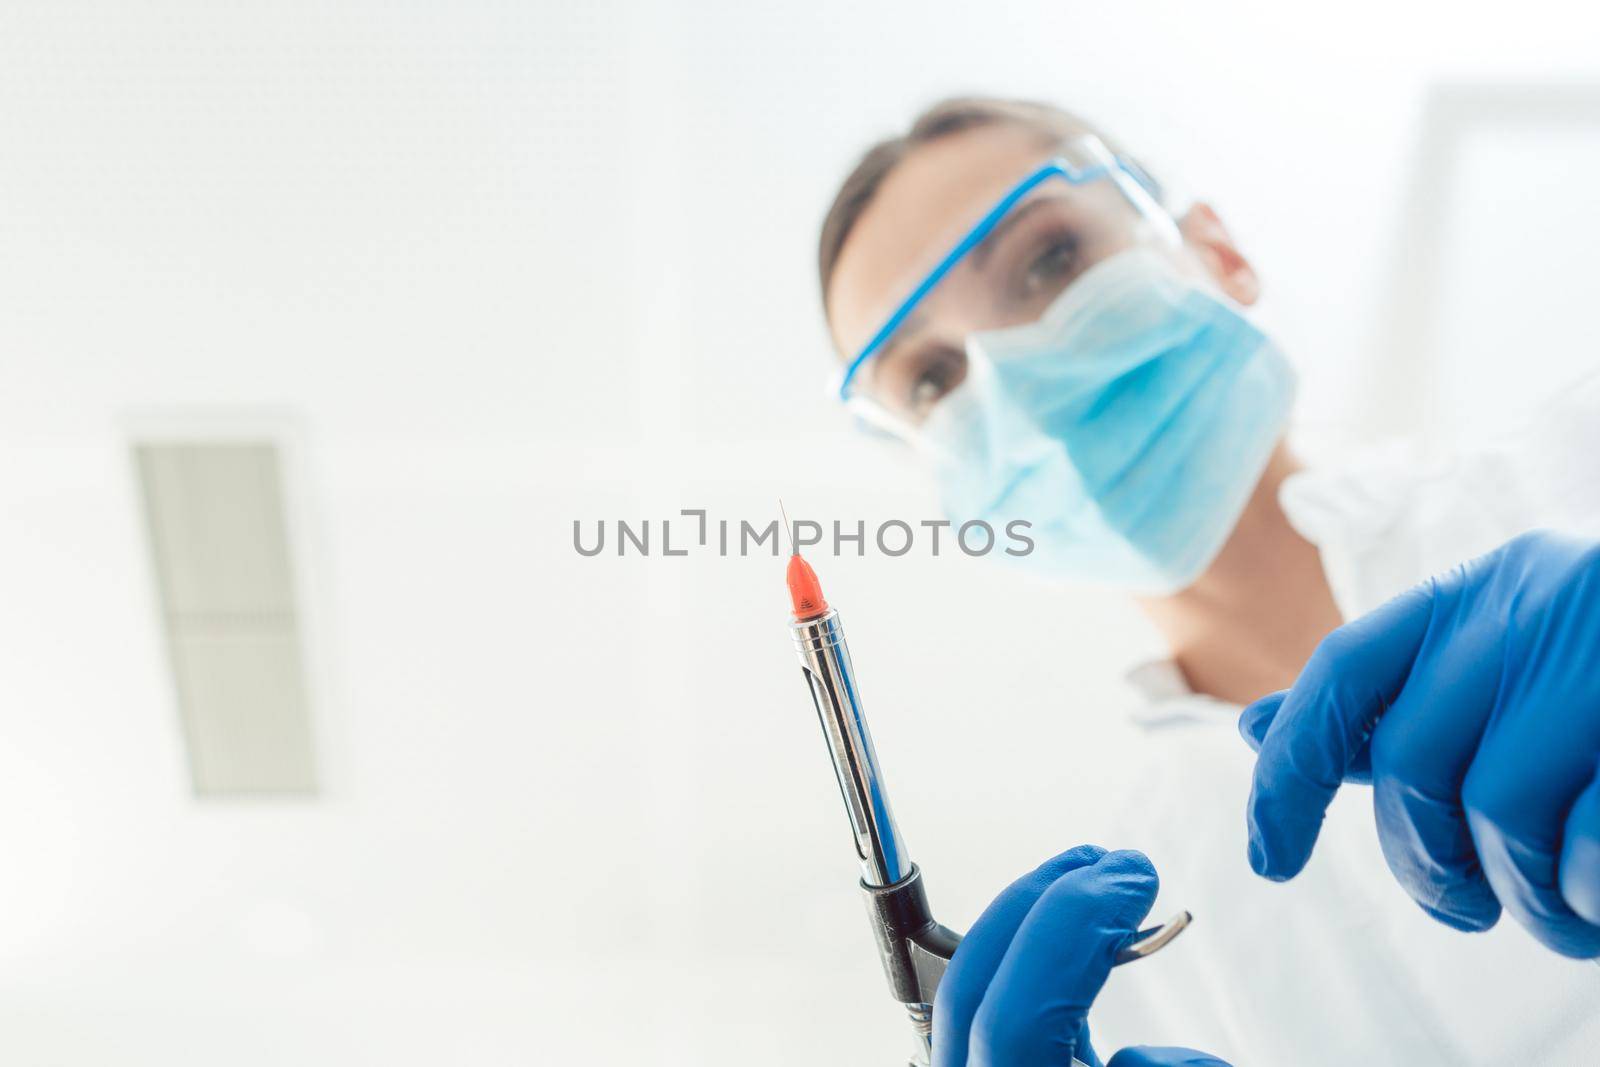 Dentist with anesthetic injection syringe from point of view ready for treatment